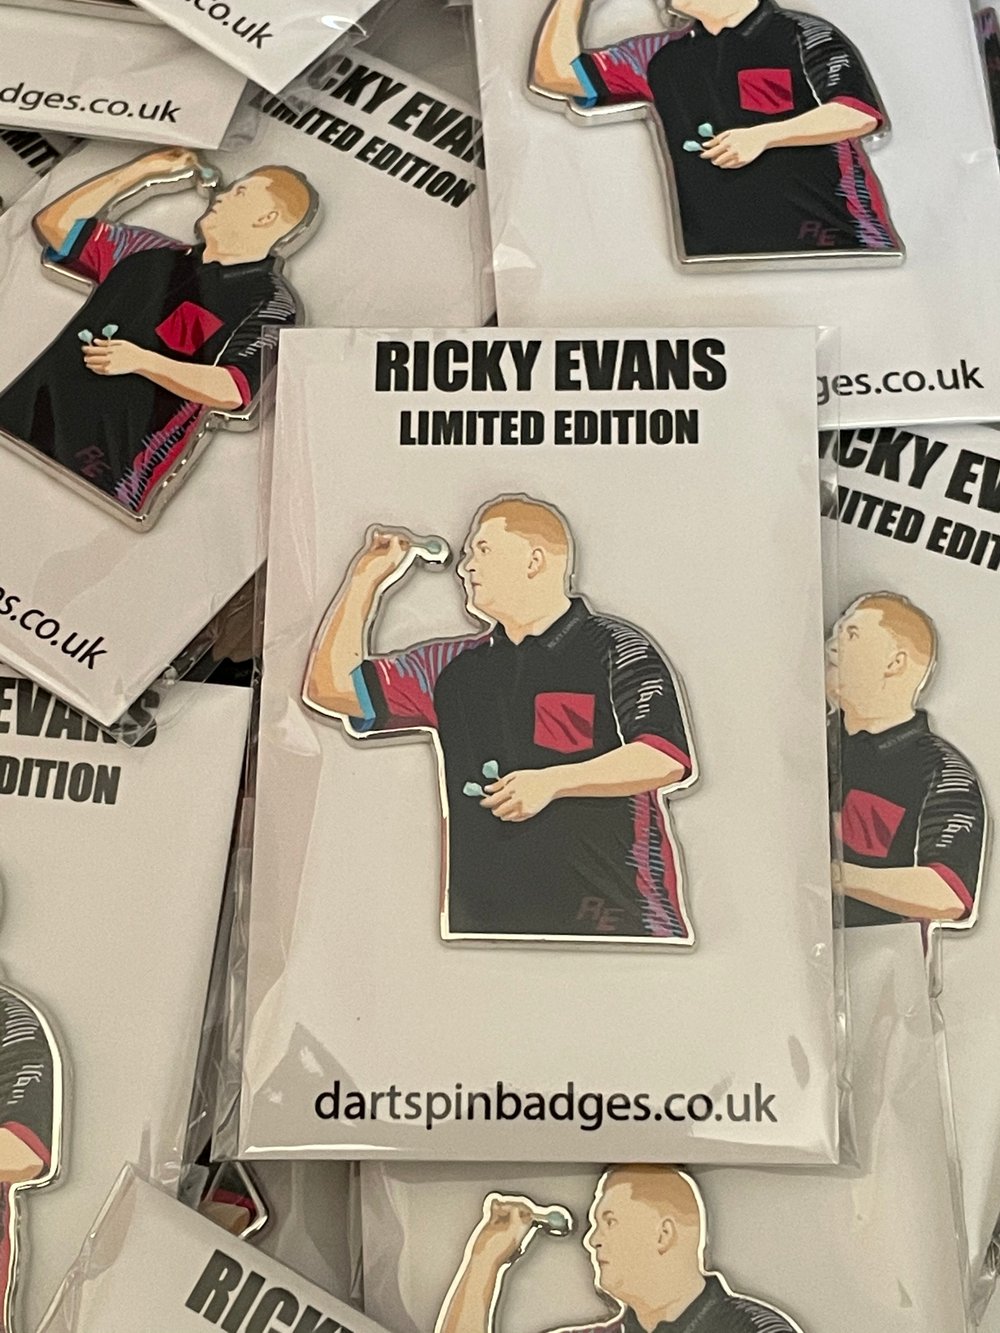 Ricky Evans limited edition pin badge